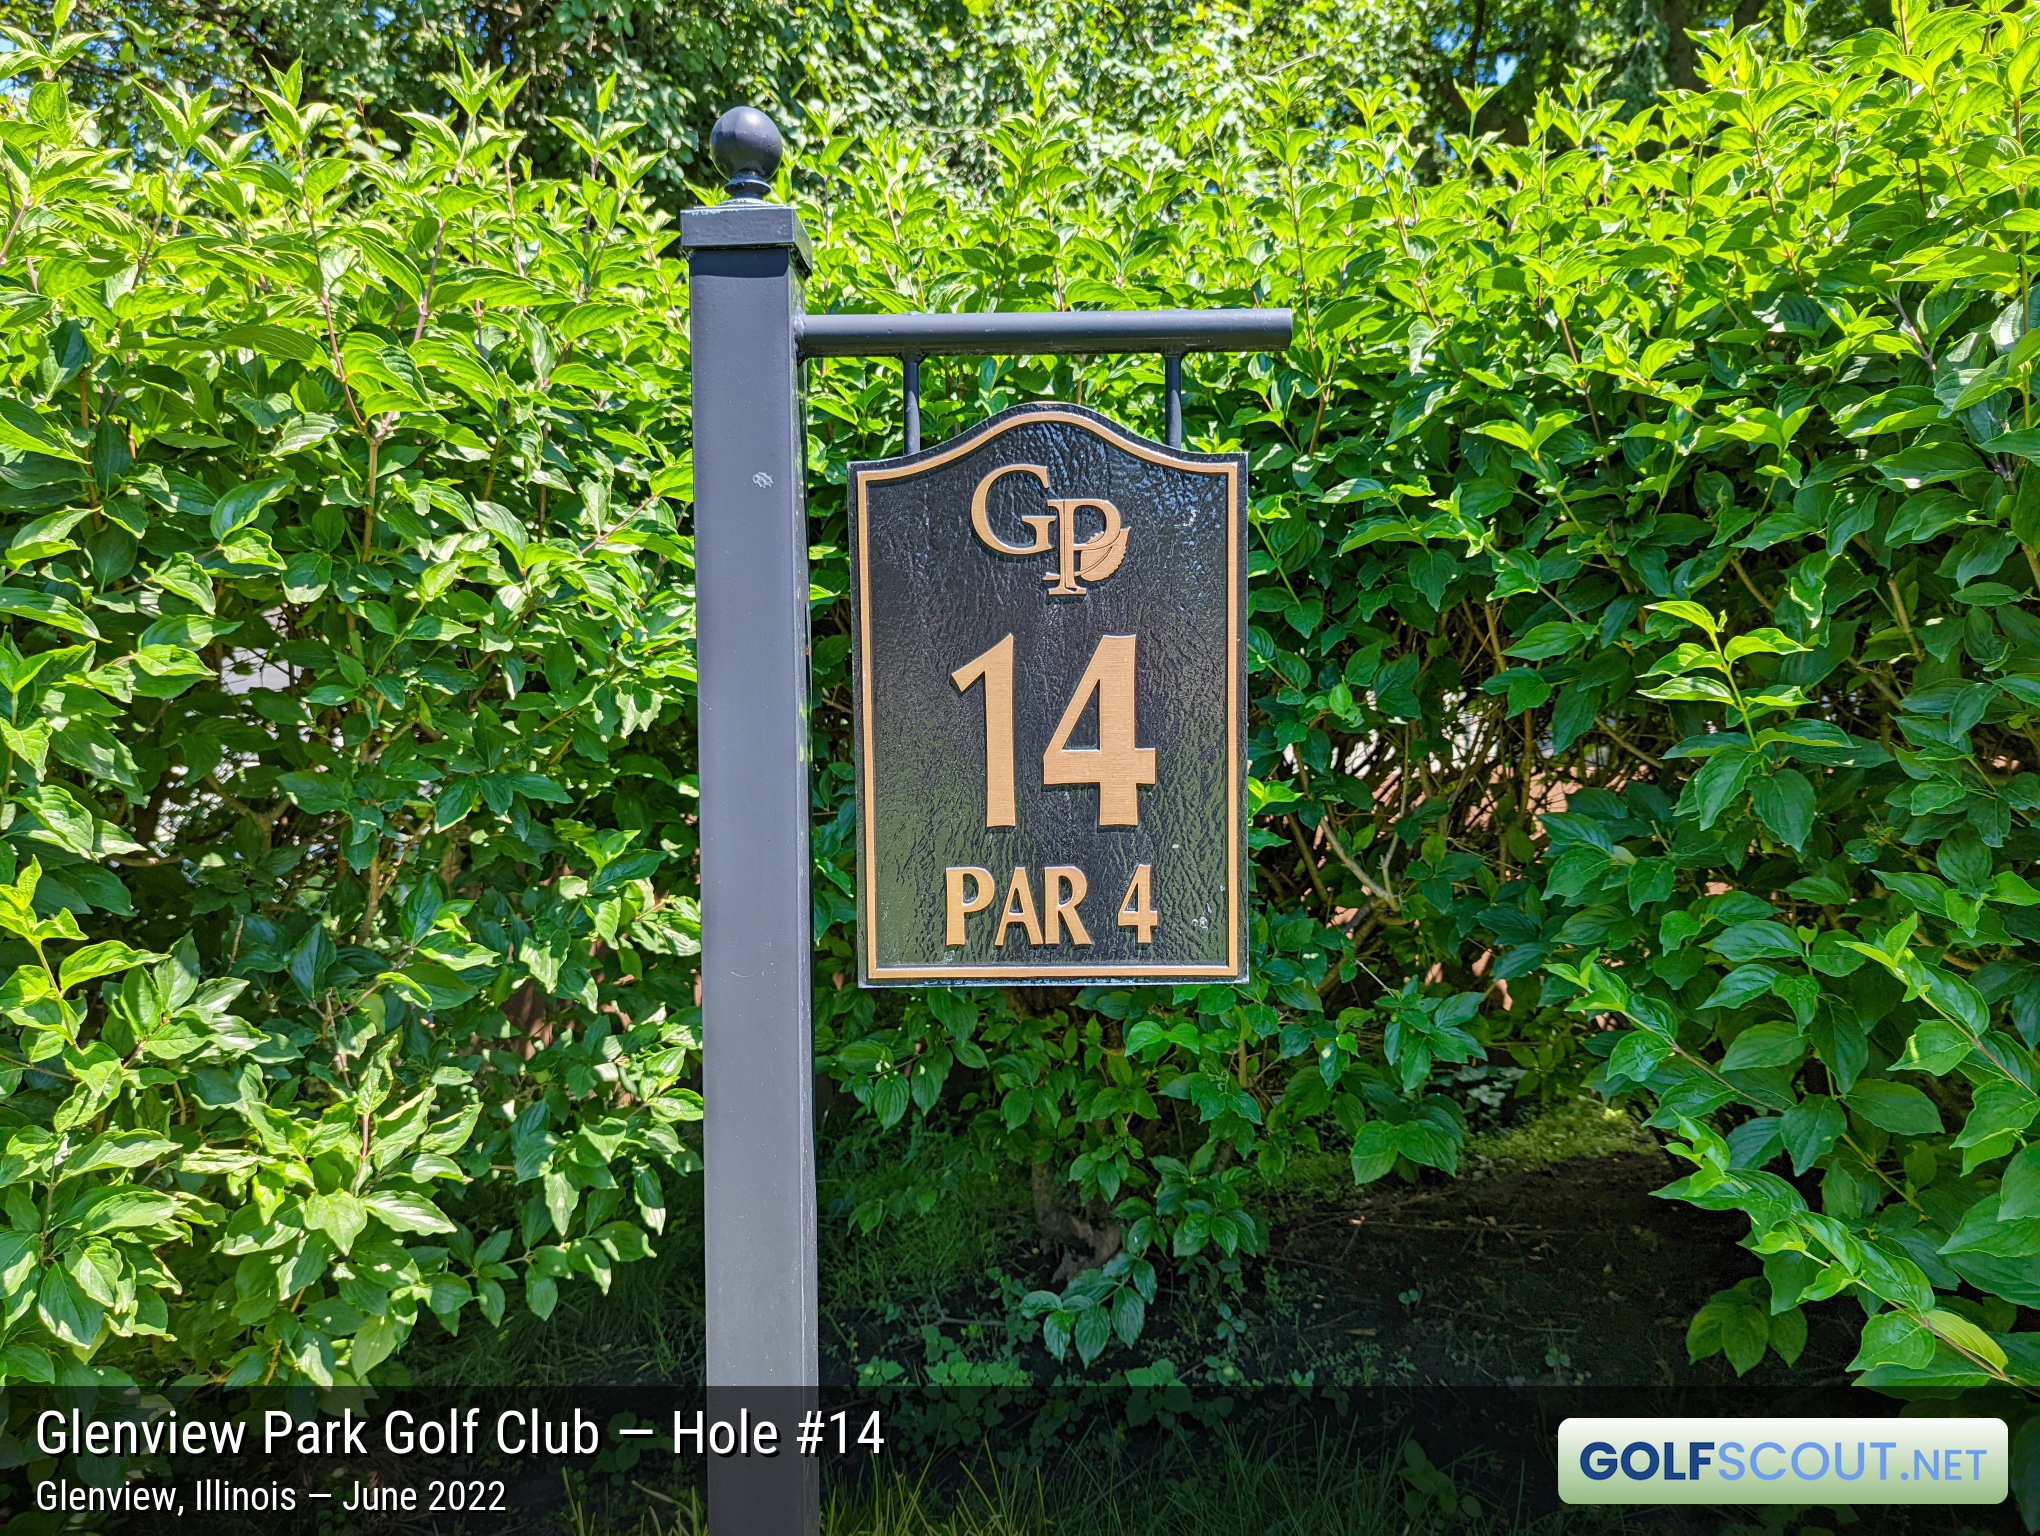 Photo of hole #14 at Glenview Park Golf Club in Glenview, Illinois. 